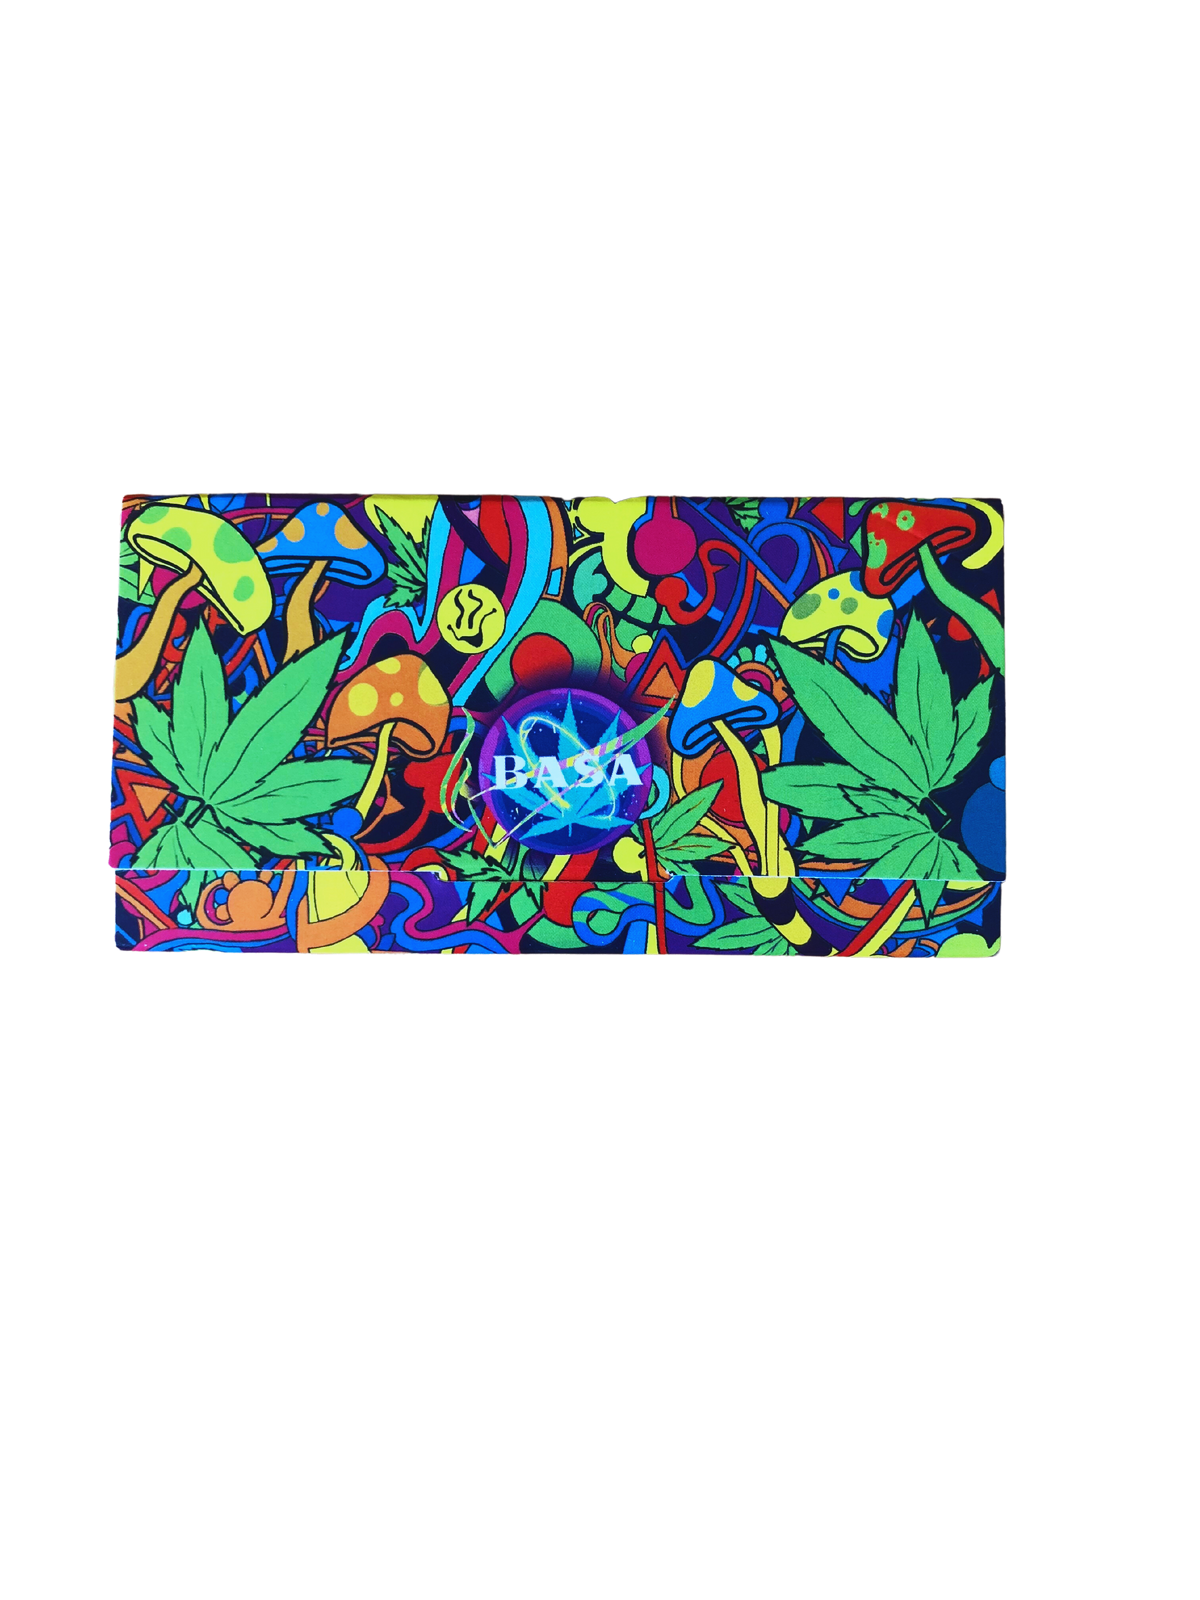 trippy things to draw weed